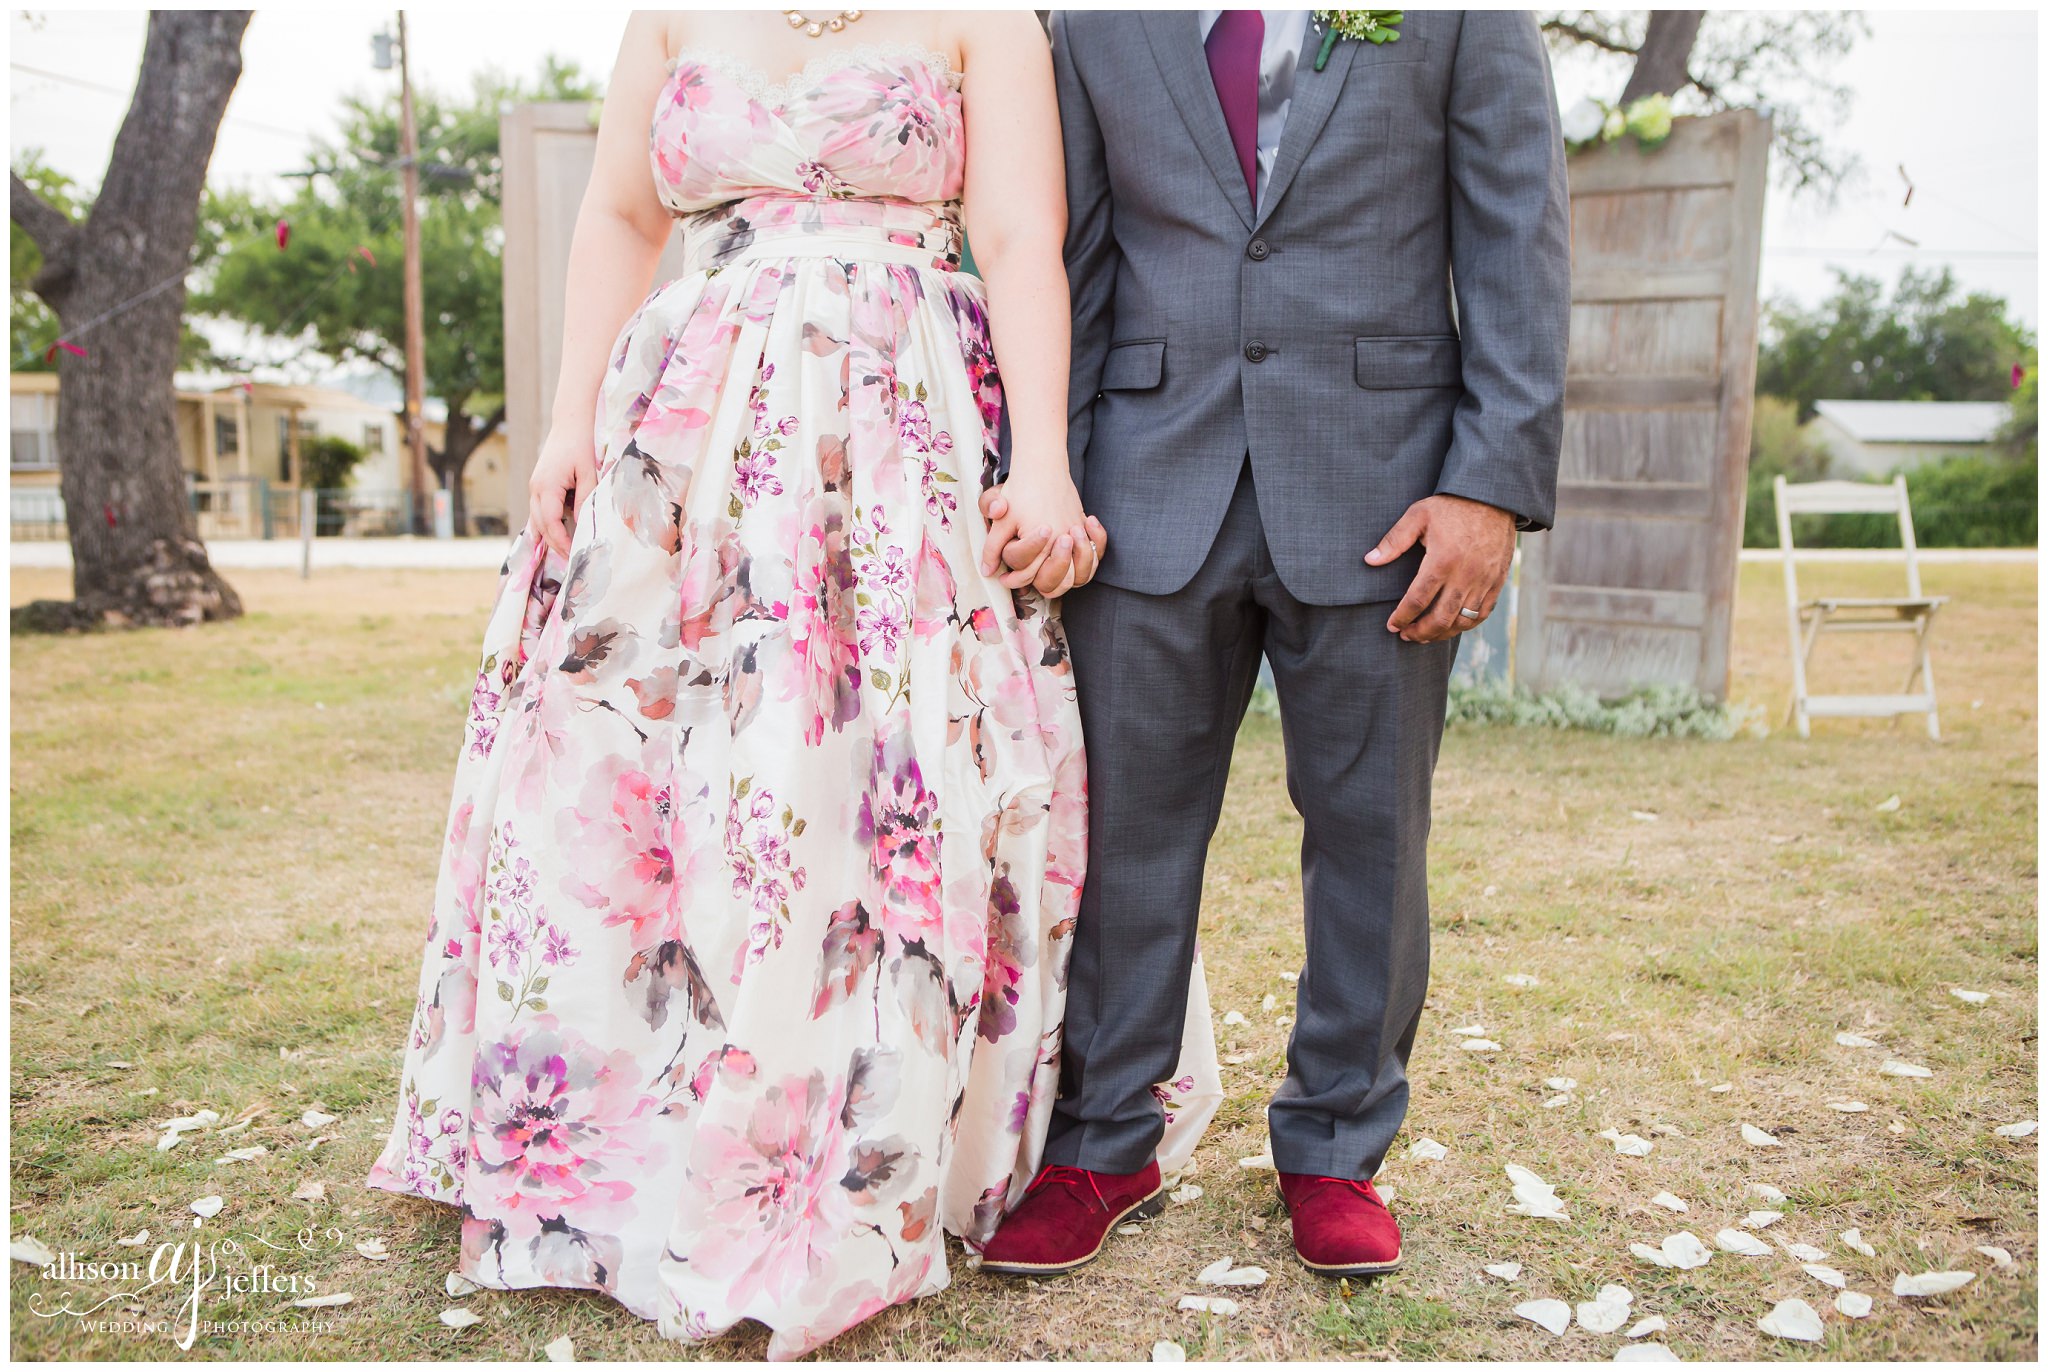 Kerrville Wedding Photographer Unique fun wedding with floral dress 0061